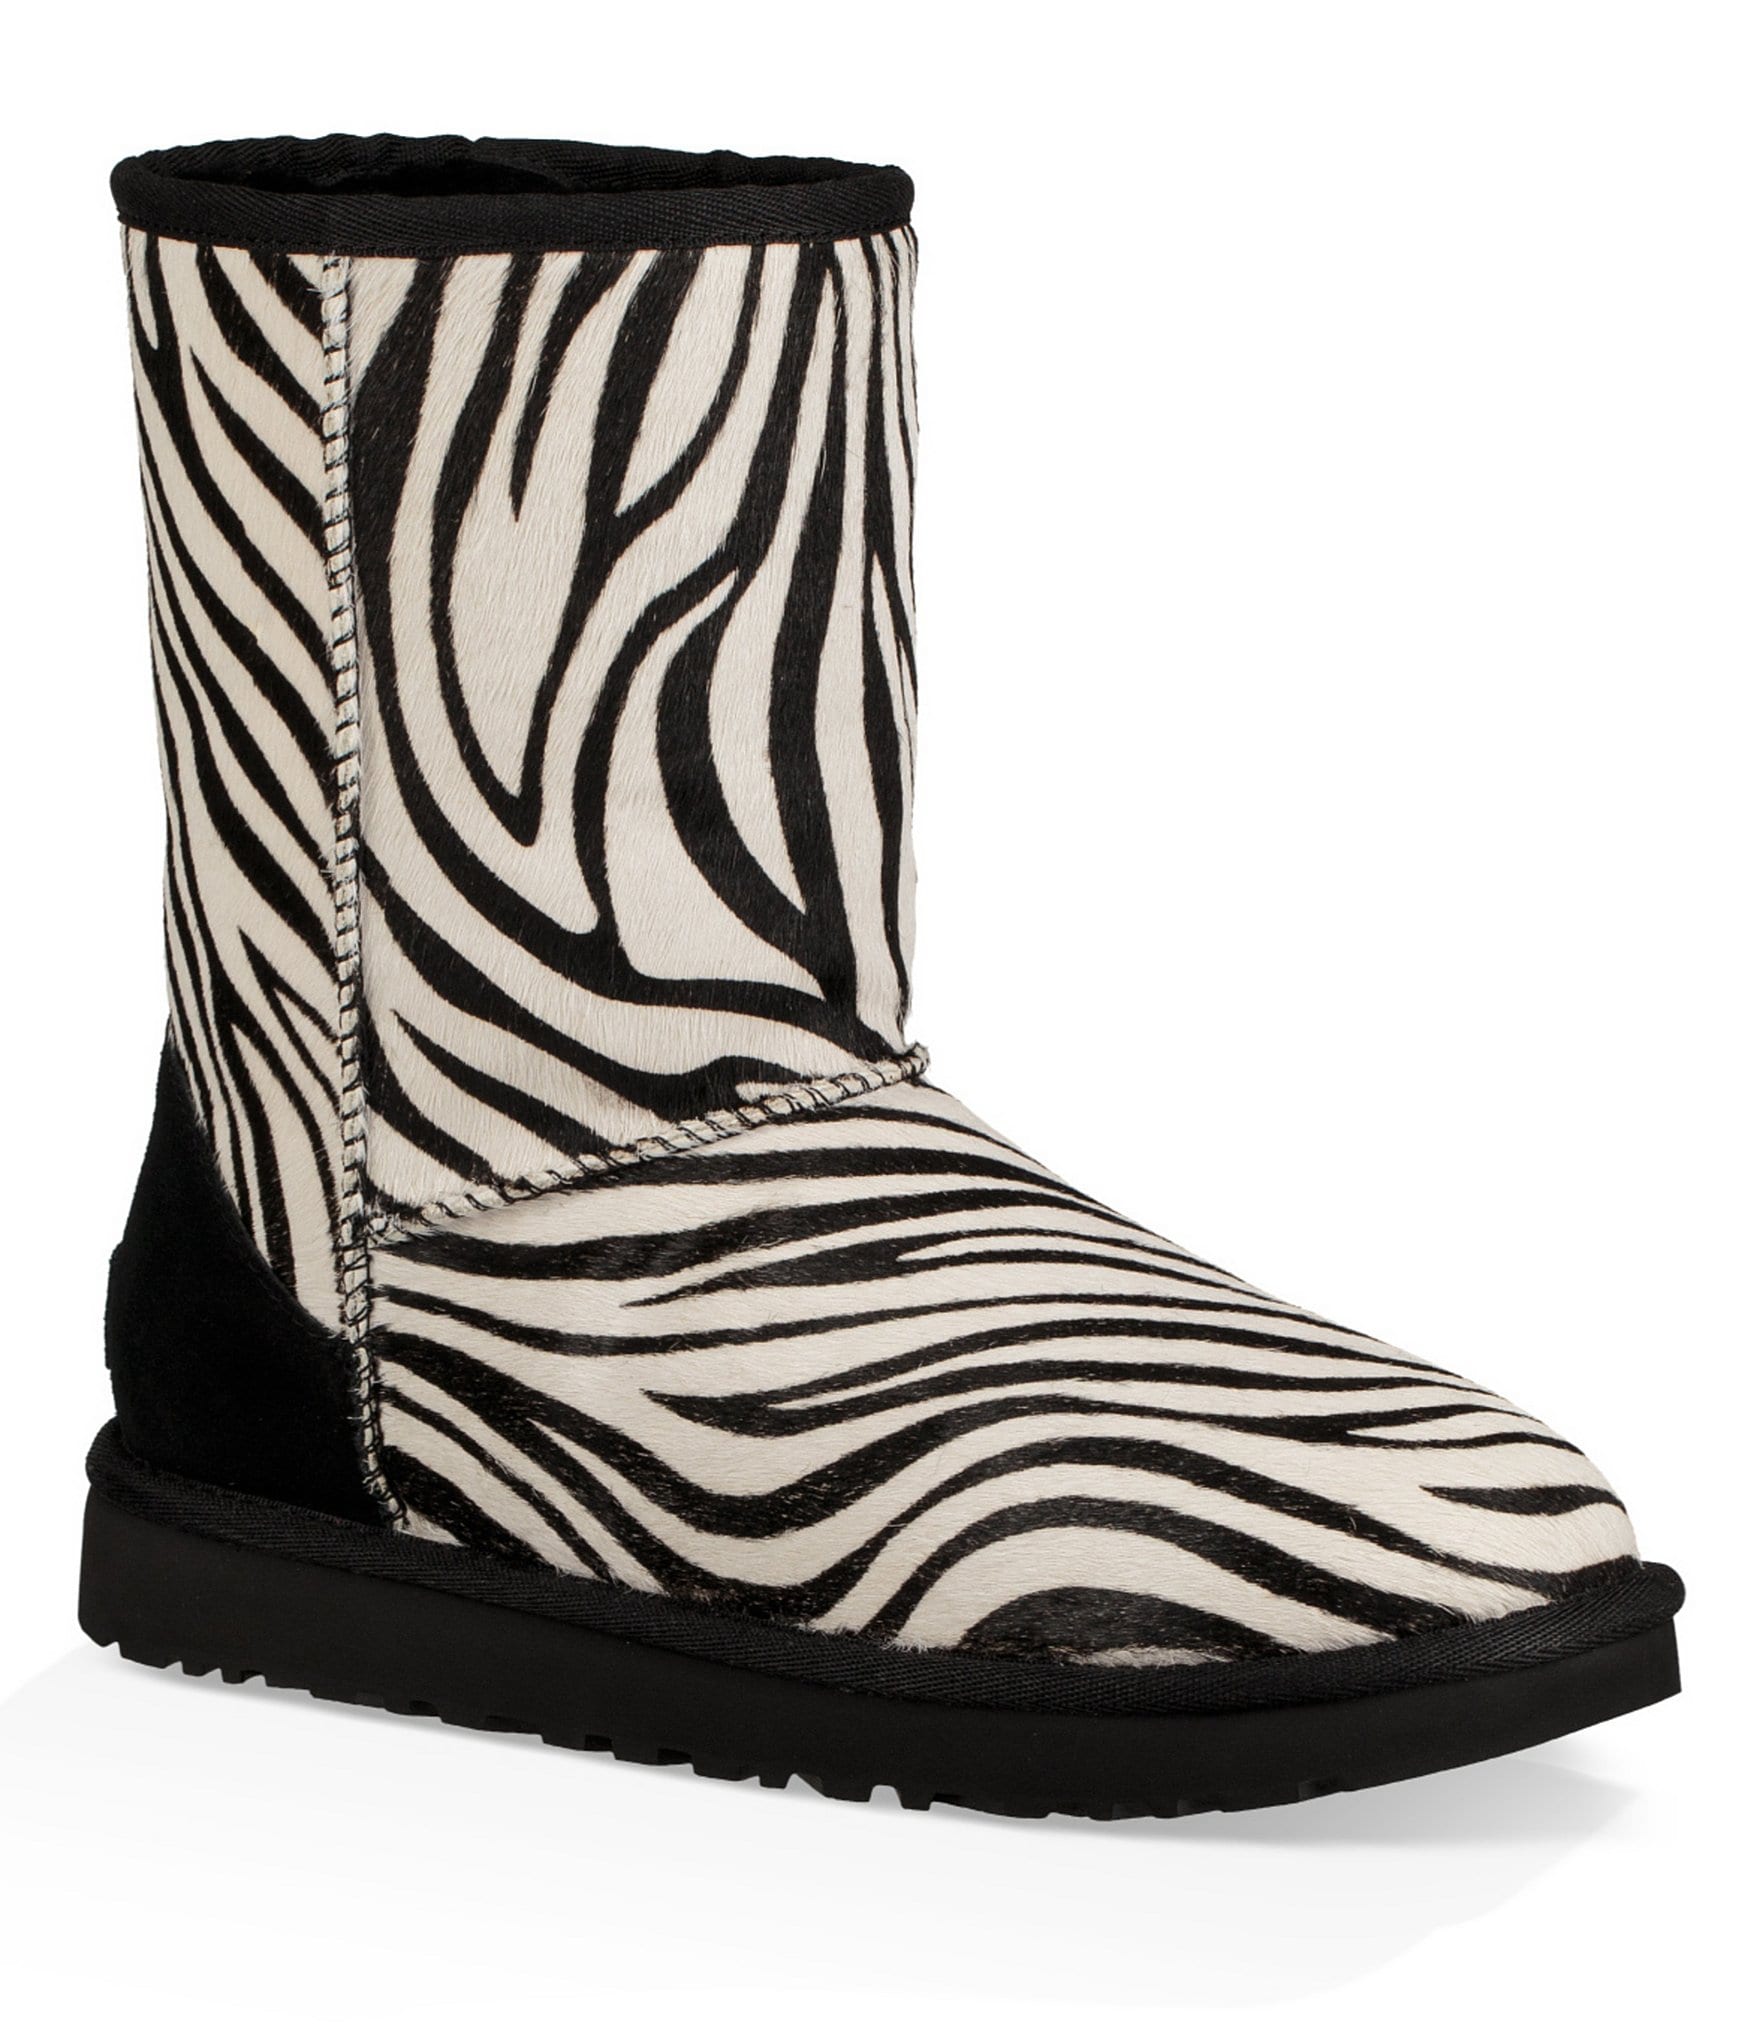 Leopard Print Ugg Wellie Boots | Division of Global Affairs